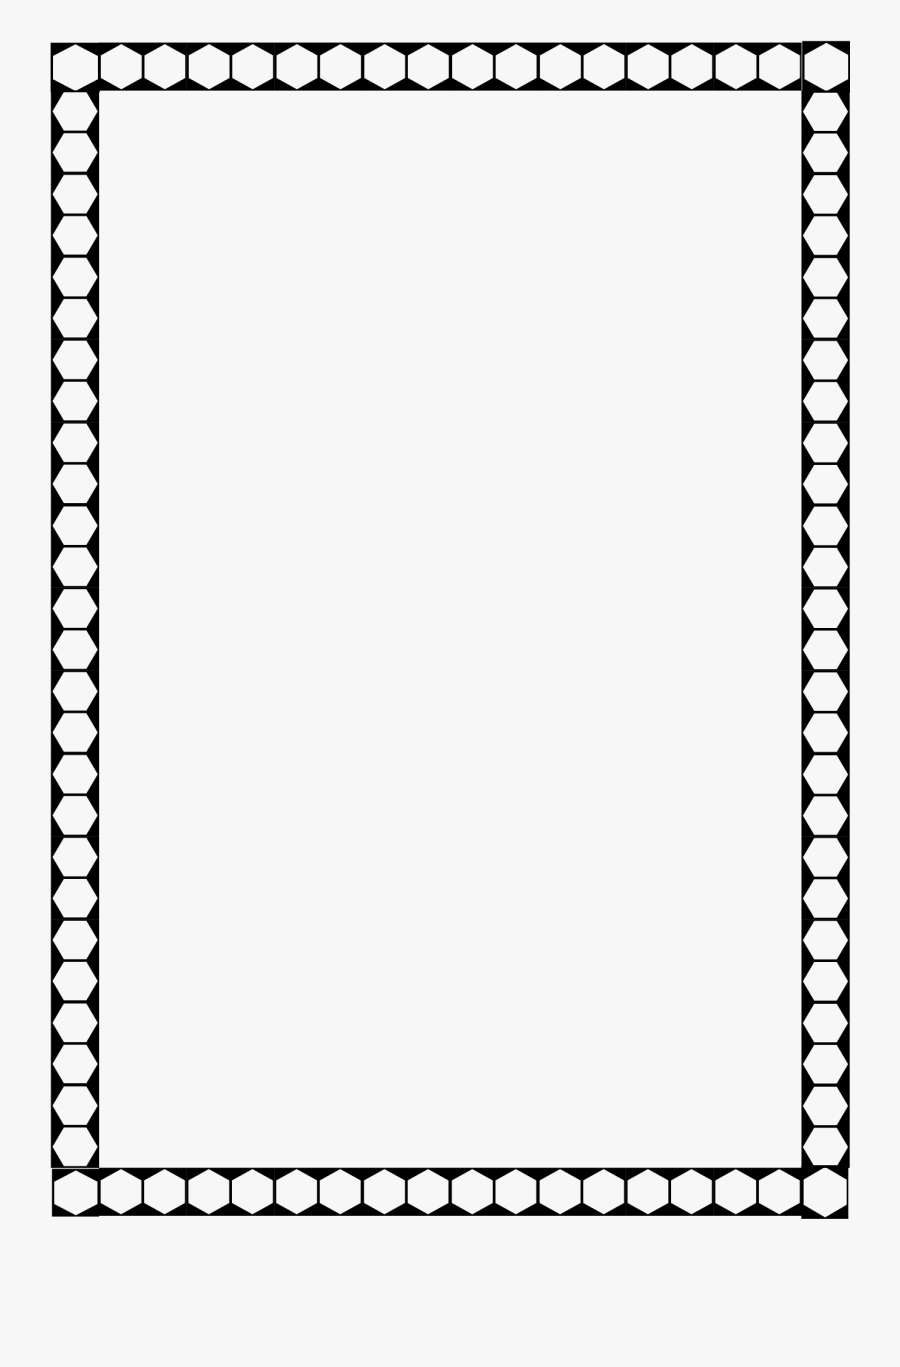 Borders For A4 Sheet, Transparent Clipart